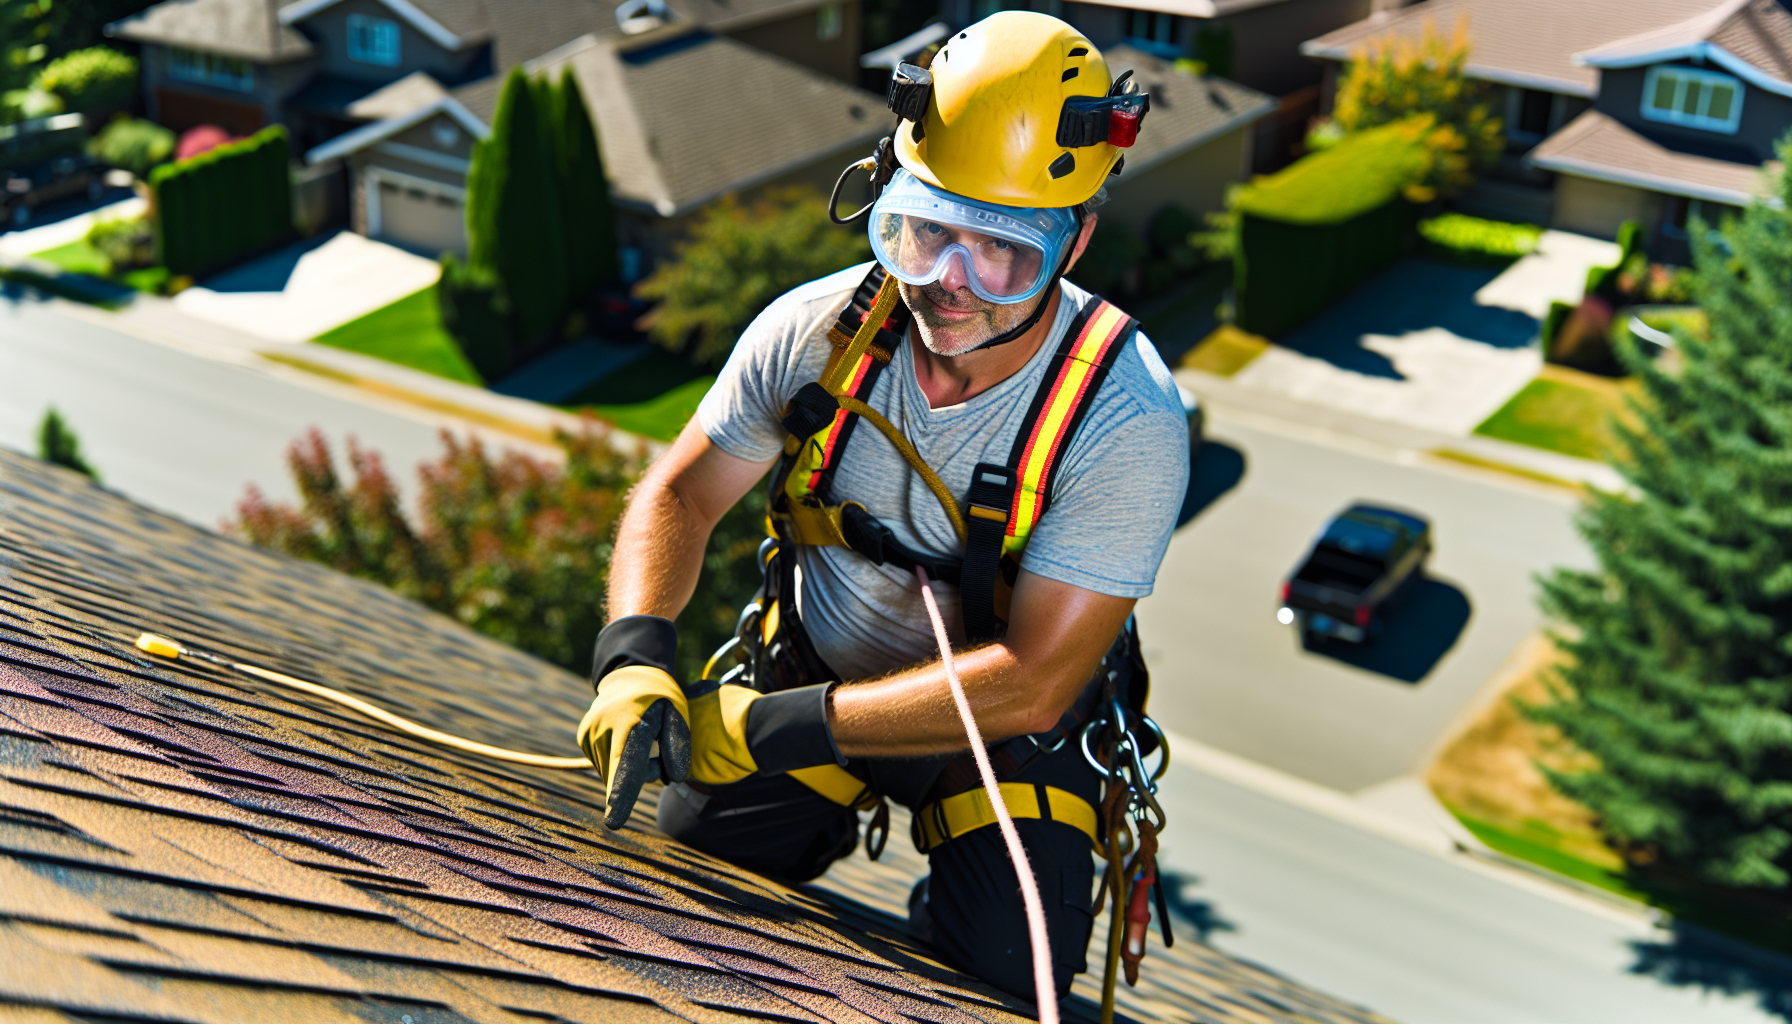 Safety harness and protective gear for roof cleaning